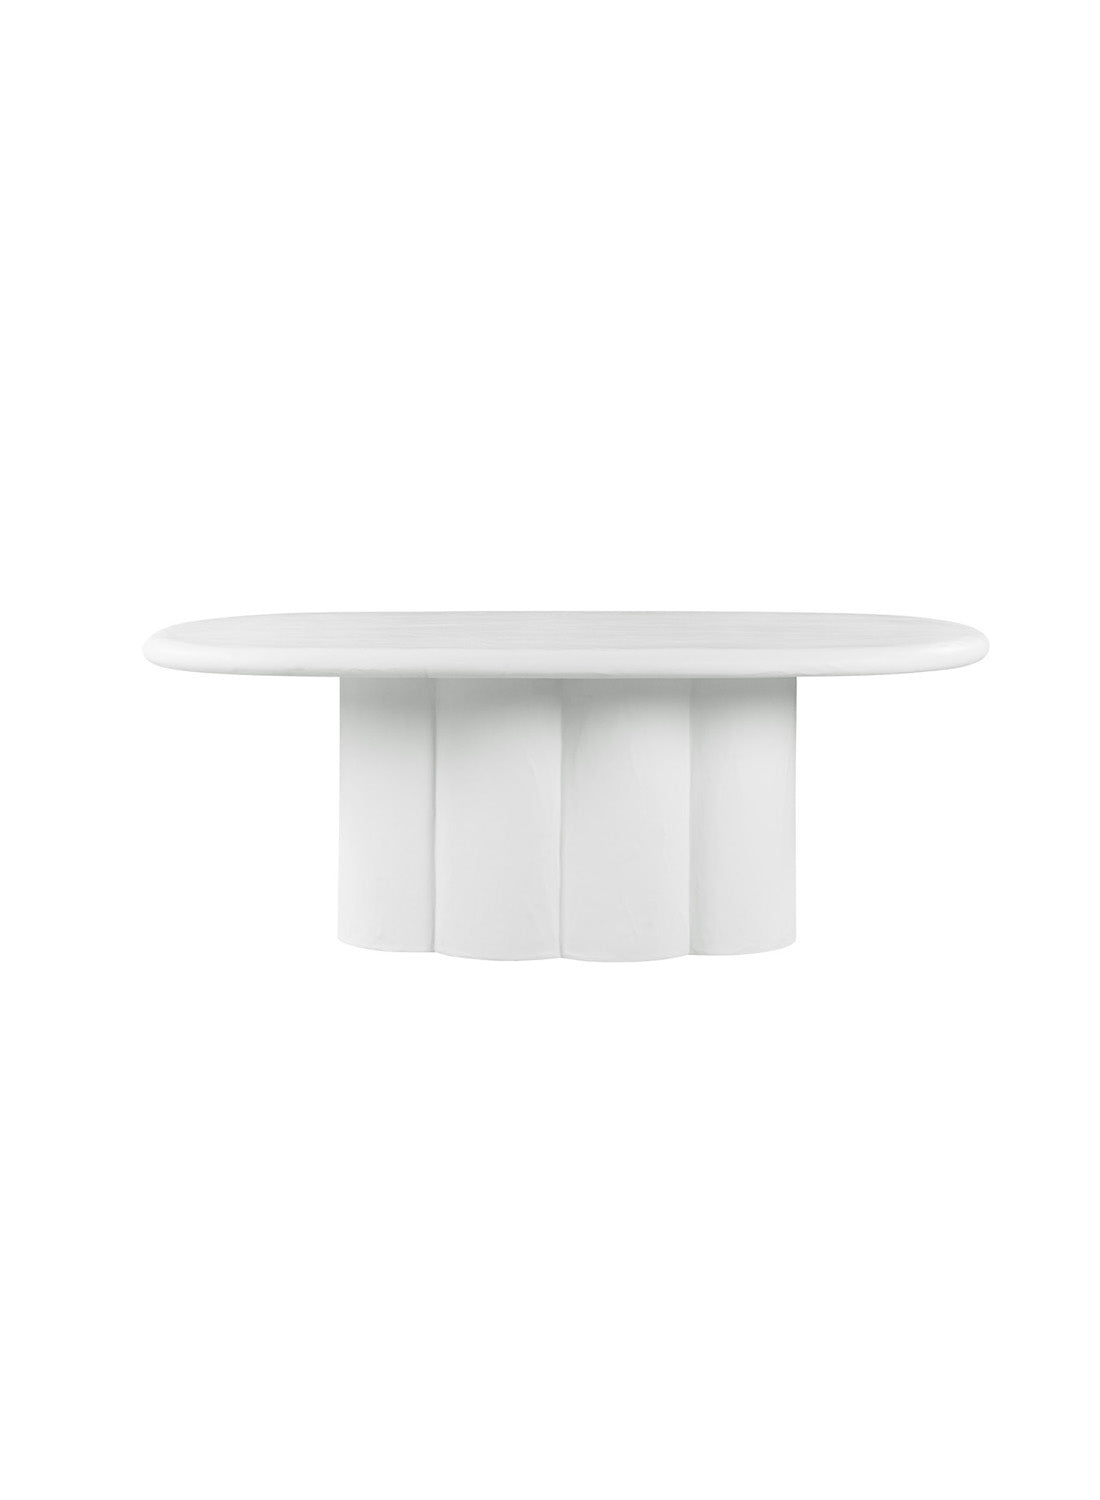 Alika Faux Plaster Oval Dining Table, White